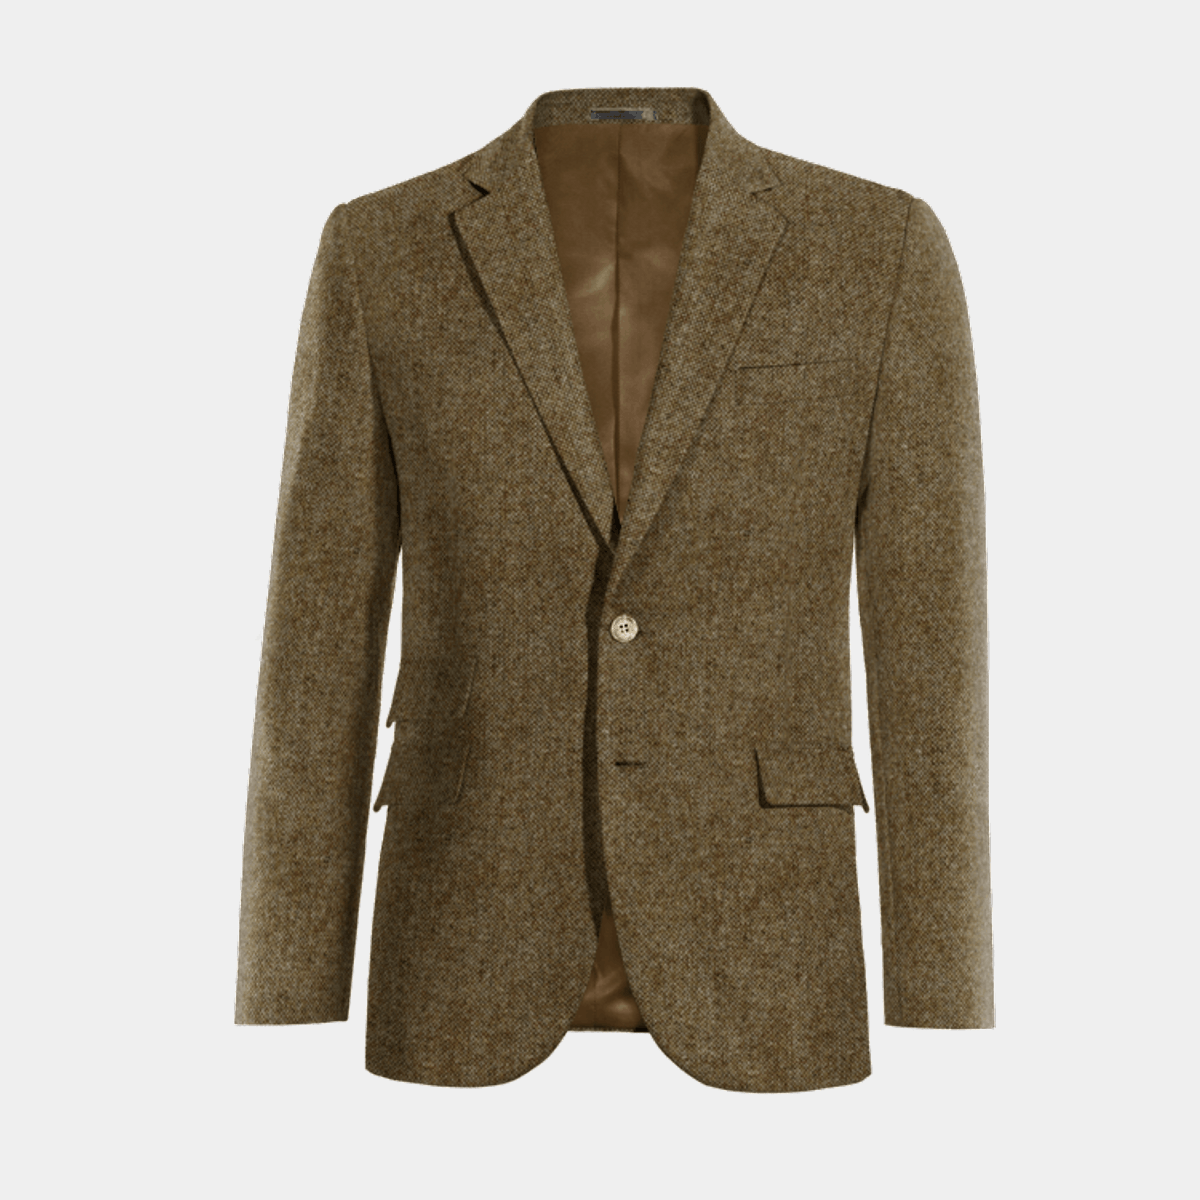 Brown Tweed Jacket with elbow patches $194 | Hockerty